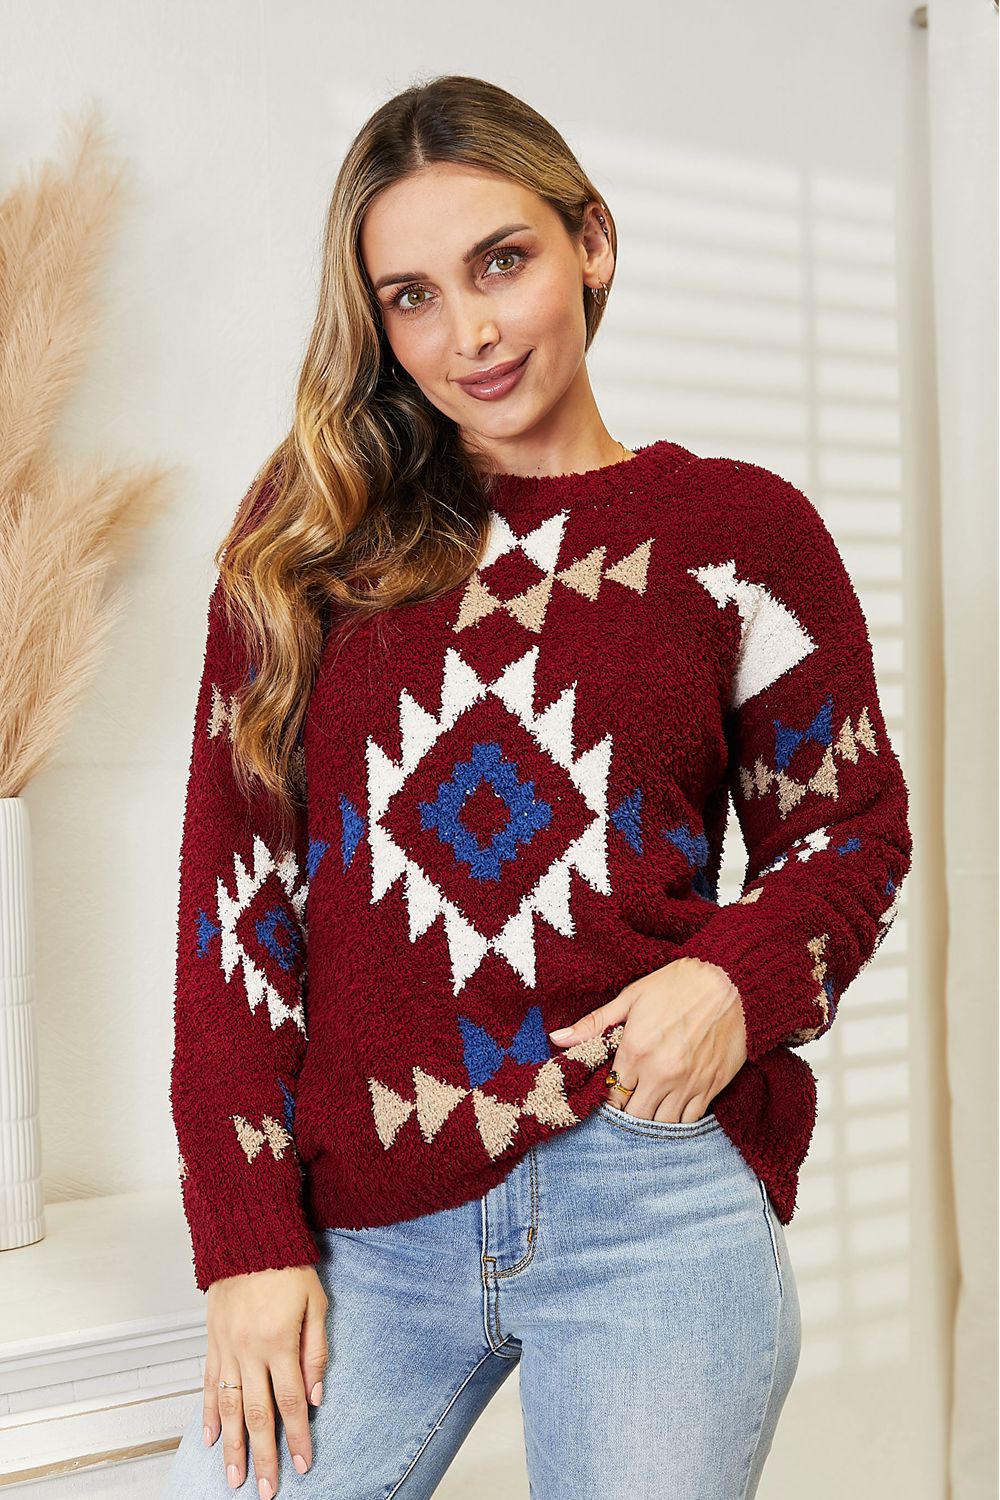 HEYSON Full Size Aztec Soft Fuzzy Sweater-Sweaters/Sweatshirts-Inspired by Justeen-Women's Clothing Boutique